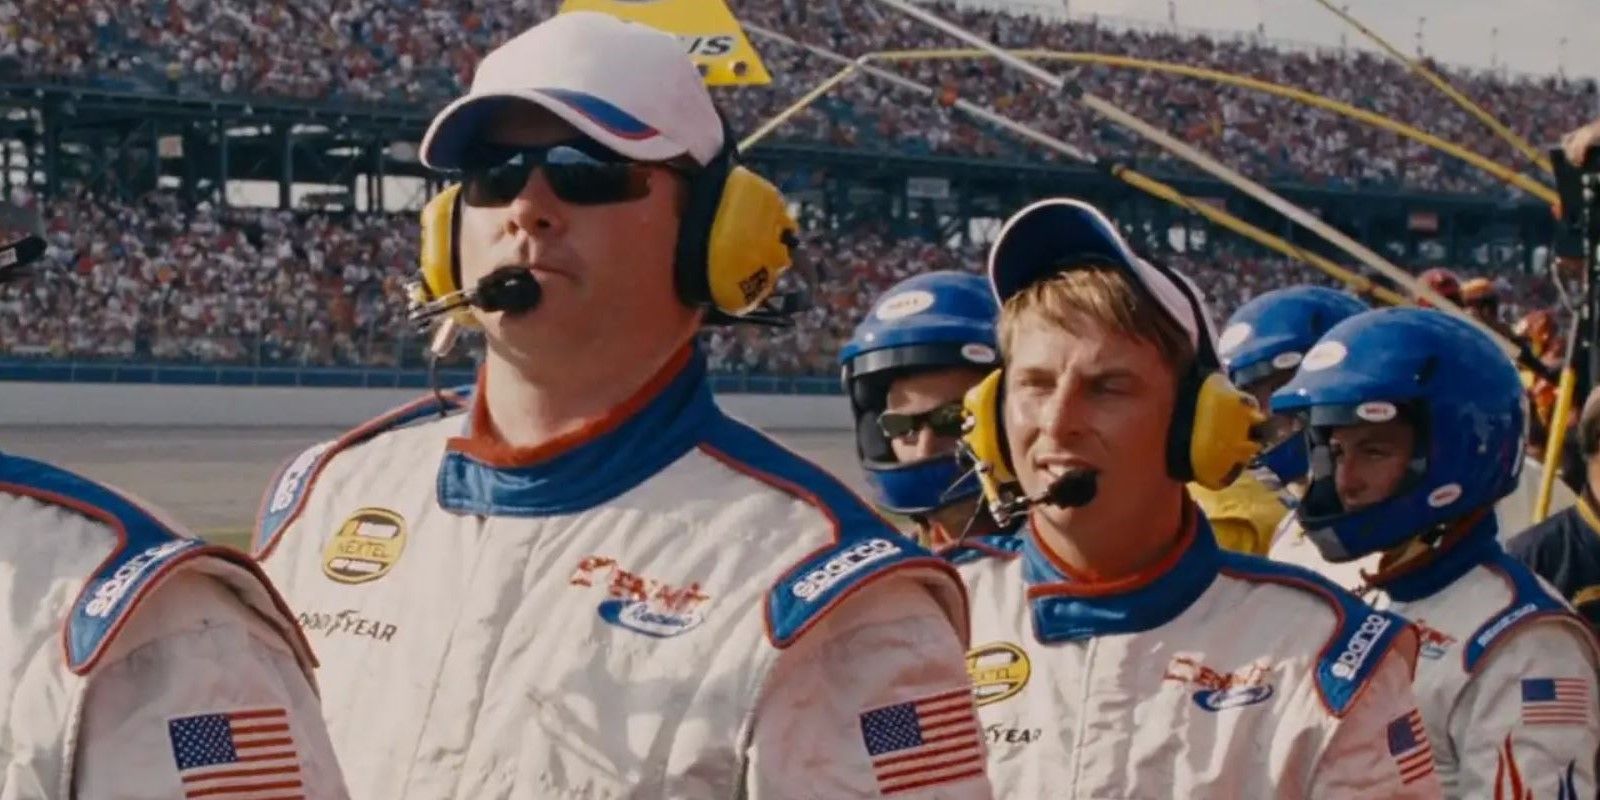 Ricky Bobby looking proud with his pit crew in Talladega Nights